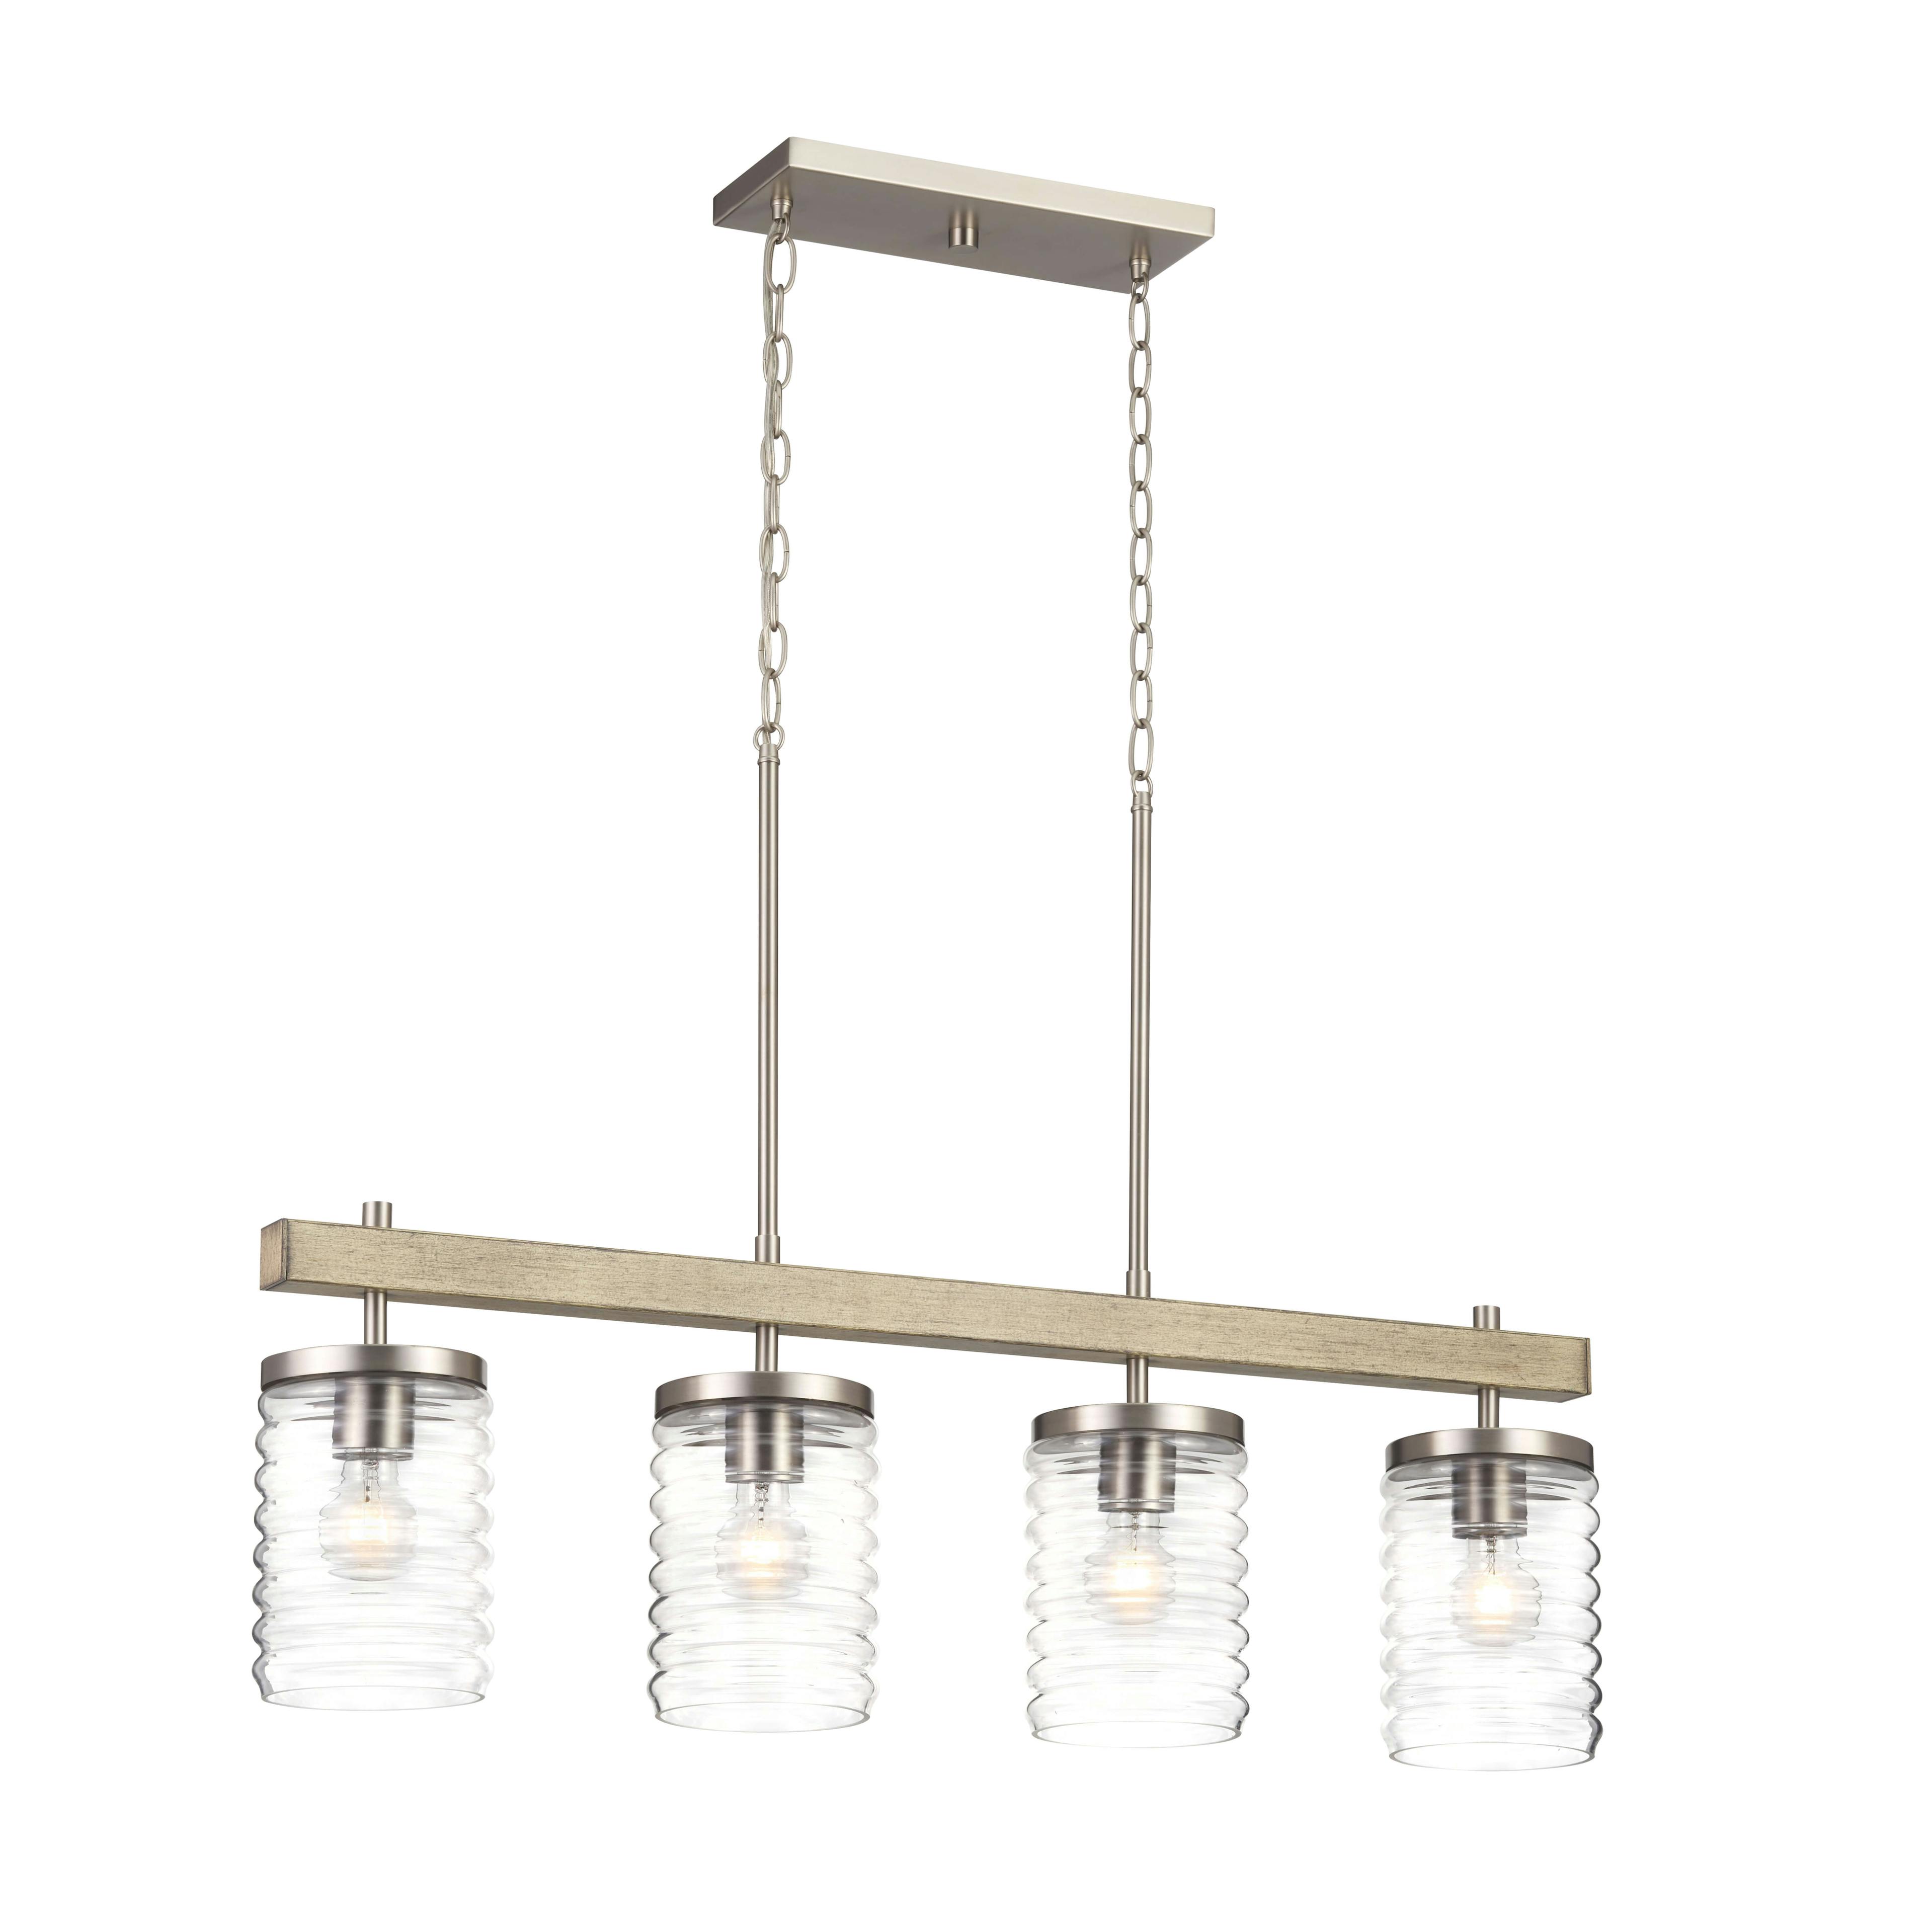 Maritime 4 Light Linear Chandelier in Brushed Nickel and Distressed Antique Gray with Ribbed Glass on a white background